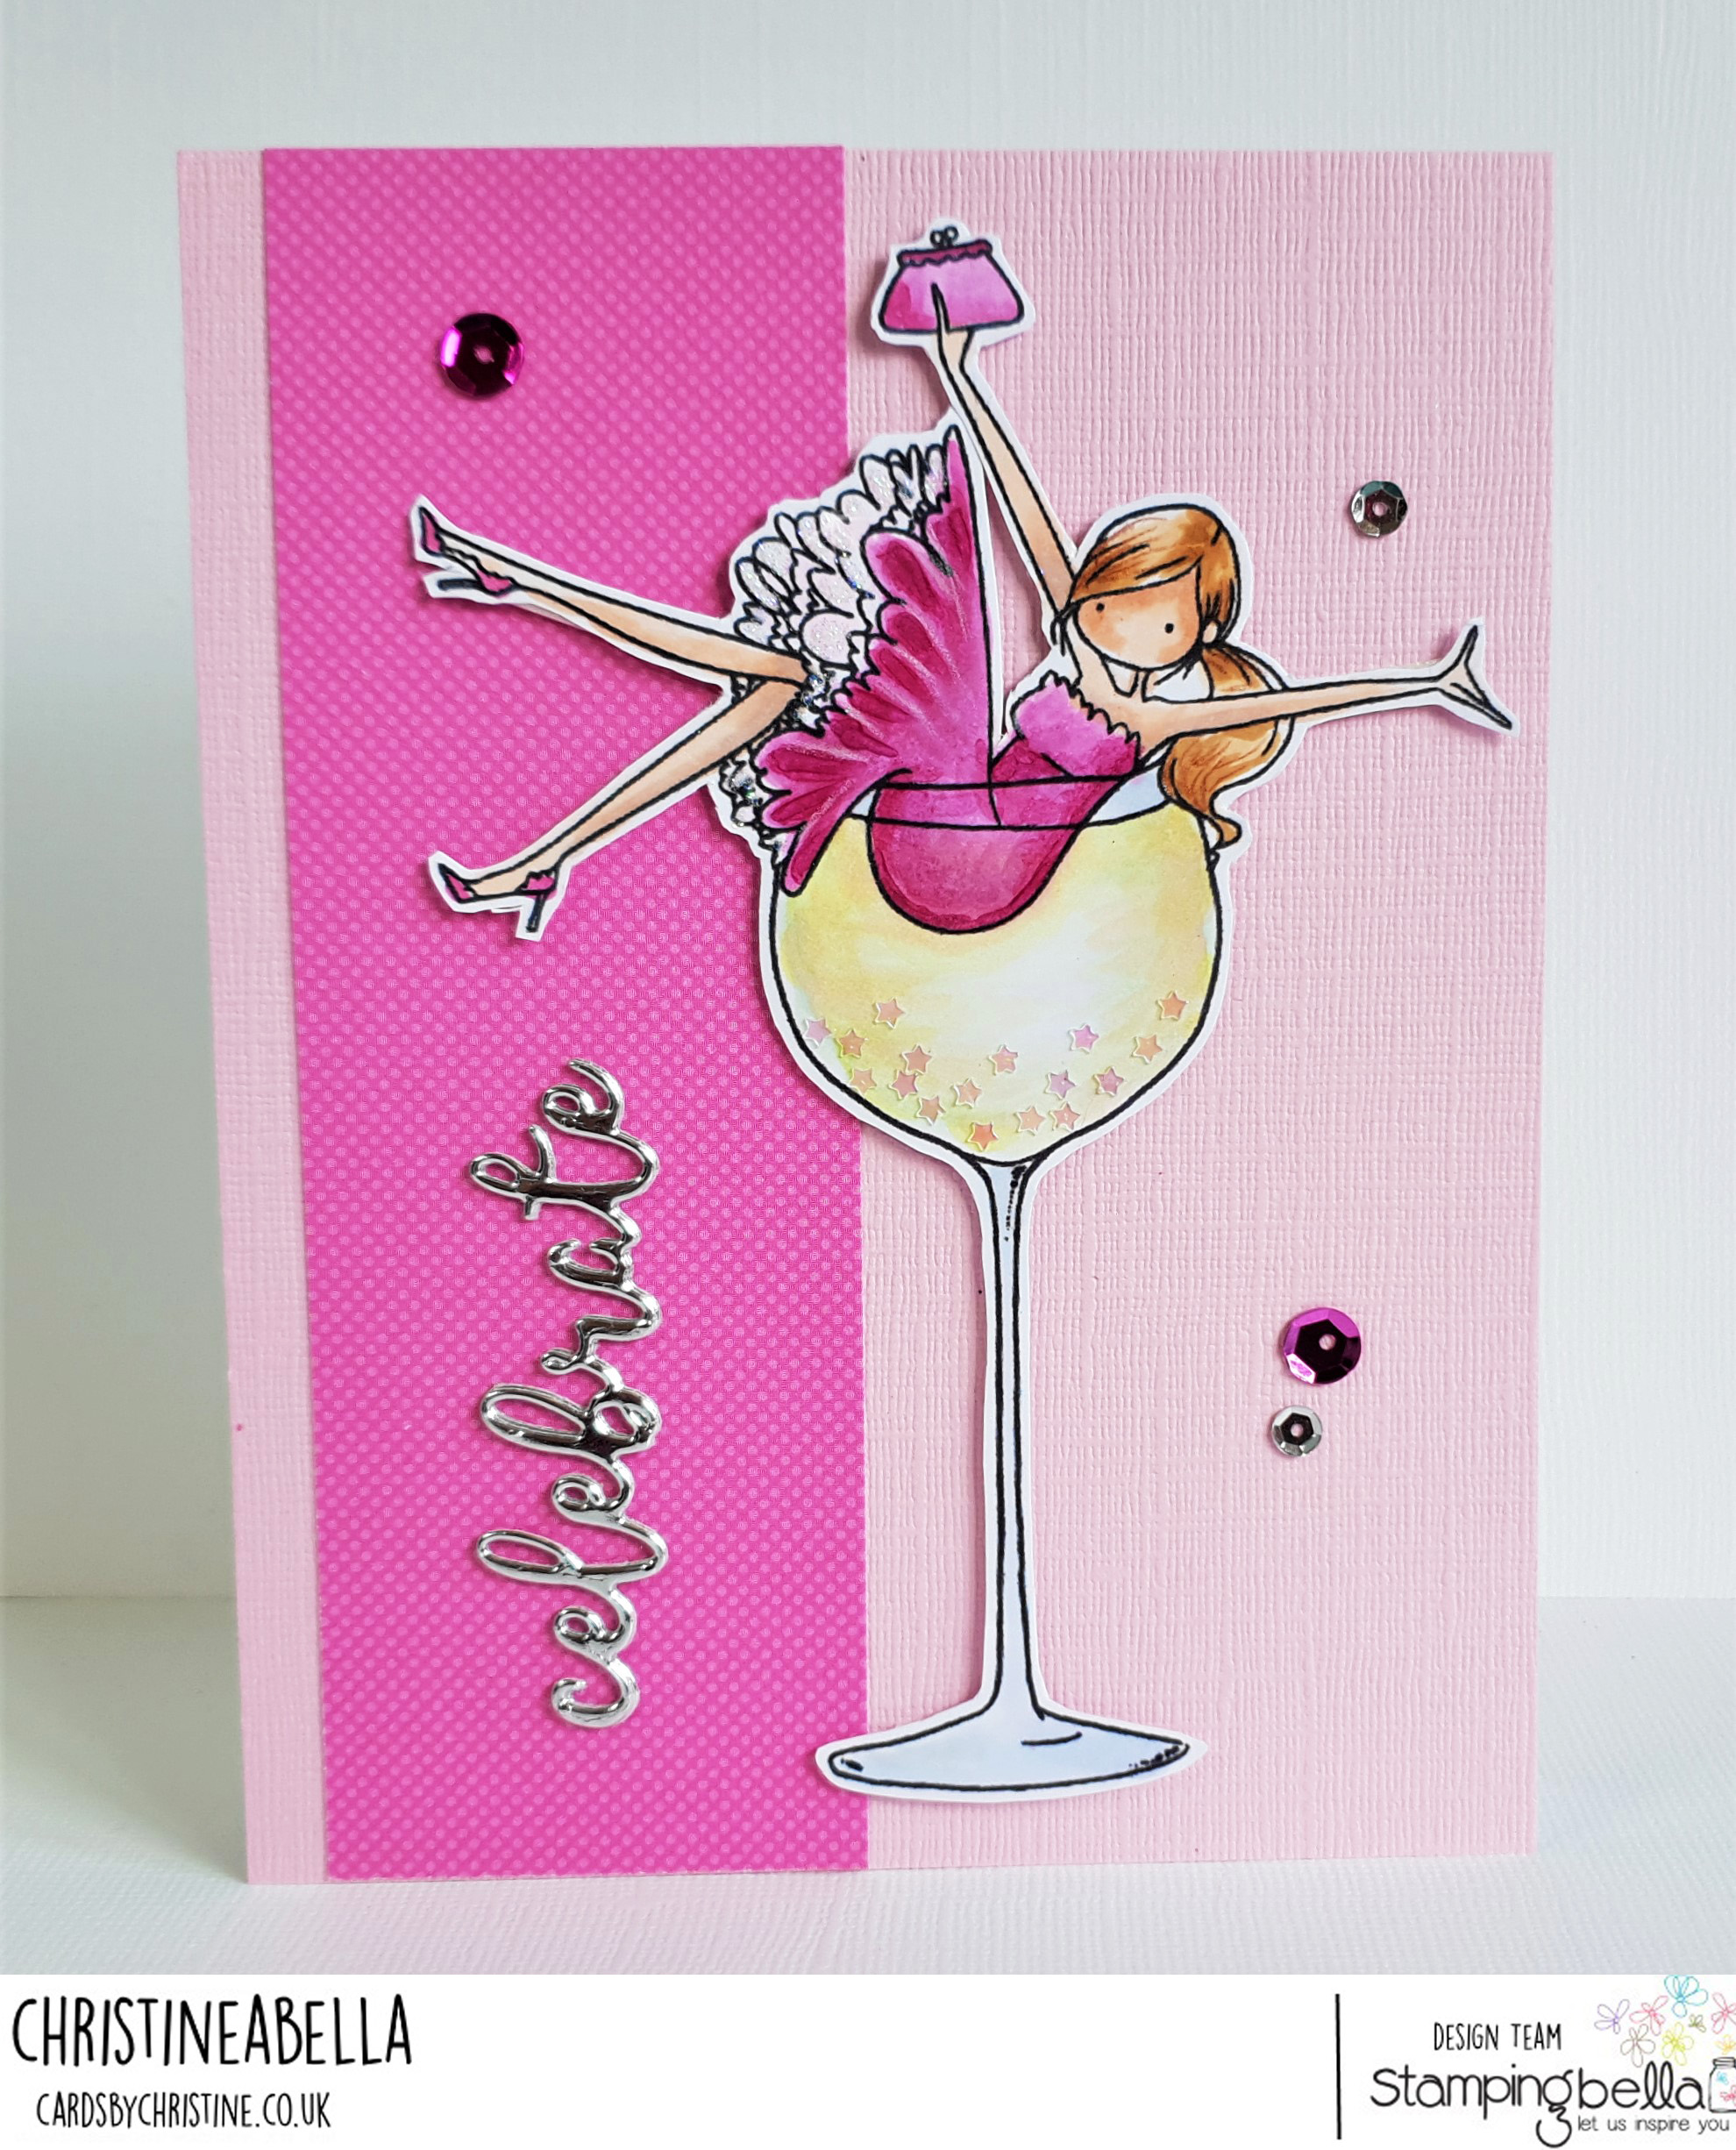 www.stampingbella.com: Rubber stamp UPTOWN GIRL WILMA LOVES WINE. Card by Christine Levison